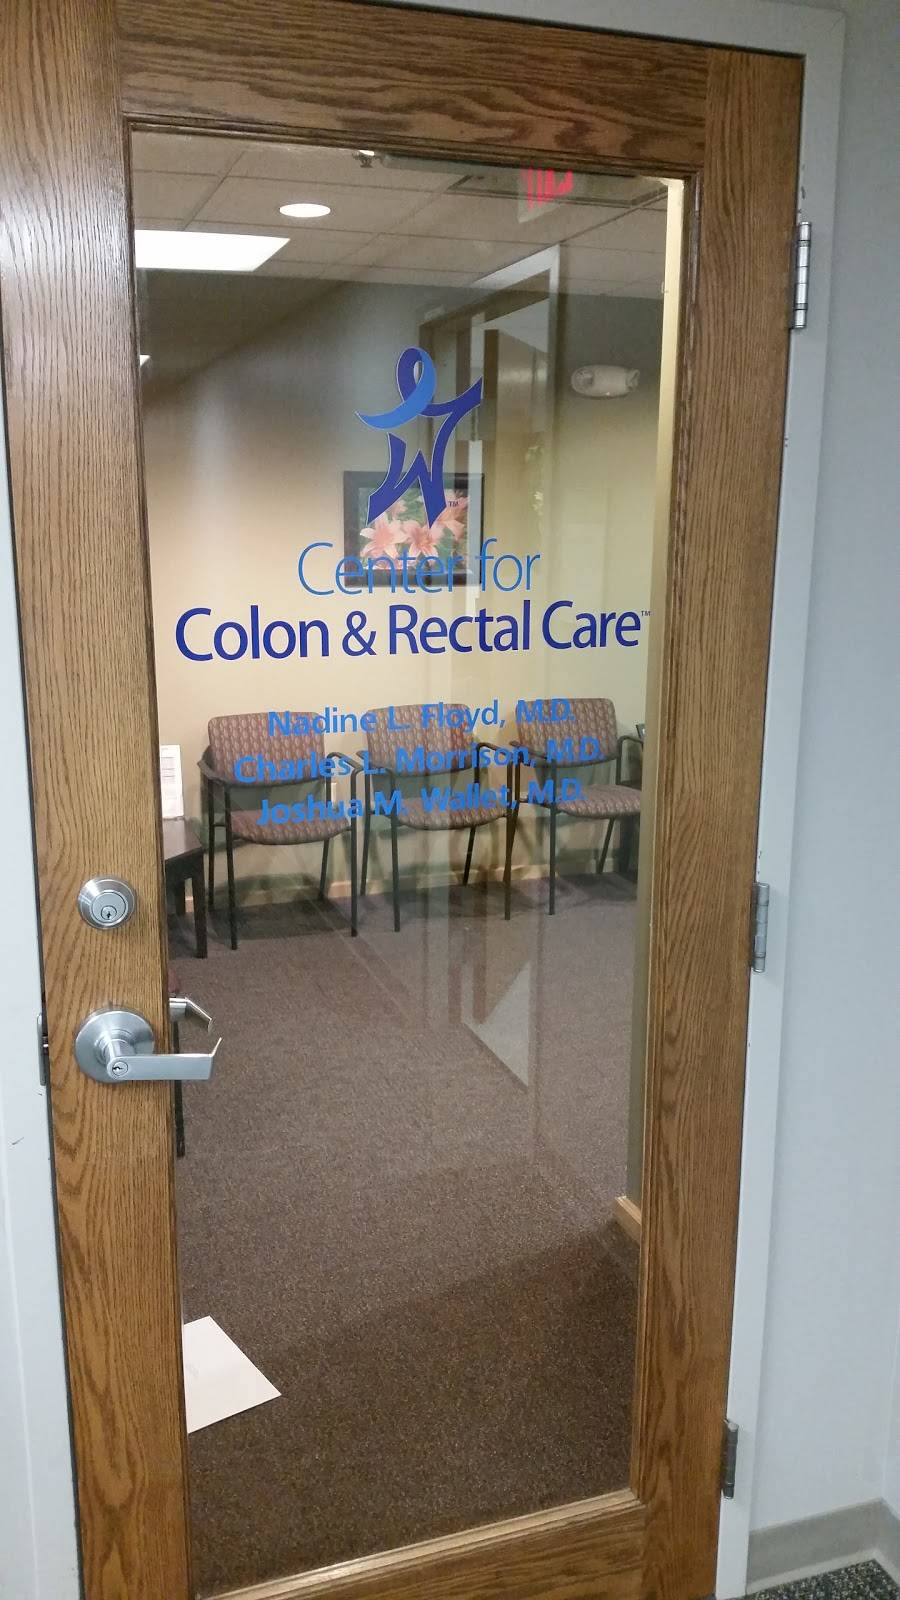 Center for Colon and Rectal Care - Joshua M Wallet MD, FACS, FAS | 7988 W Jefferson Blvd, Fort Wayne, IN 46804 | Phone: (260) 436-0259